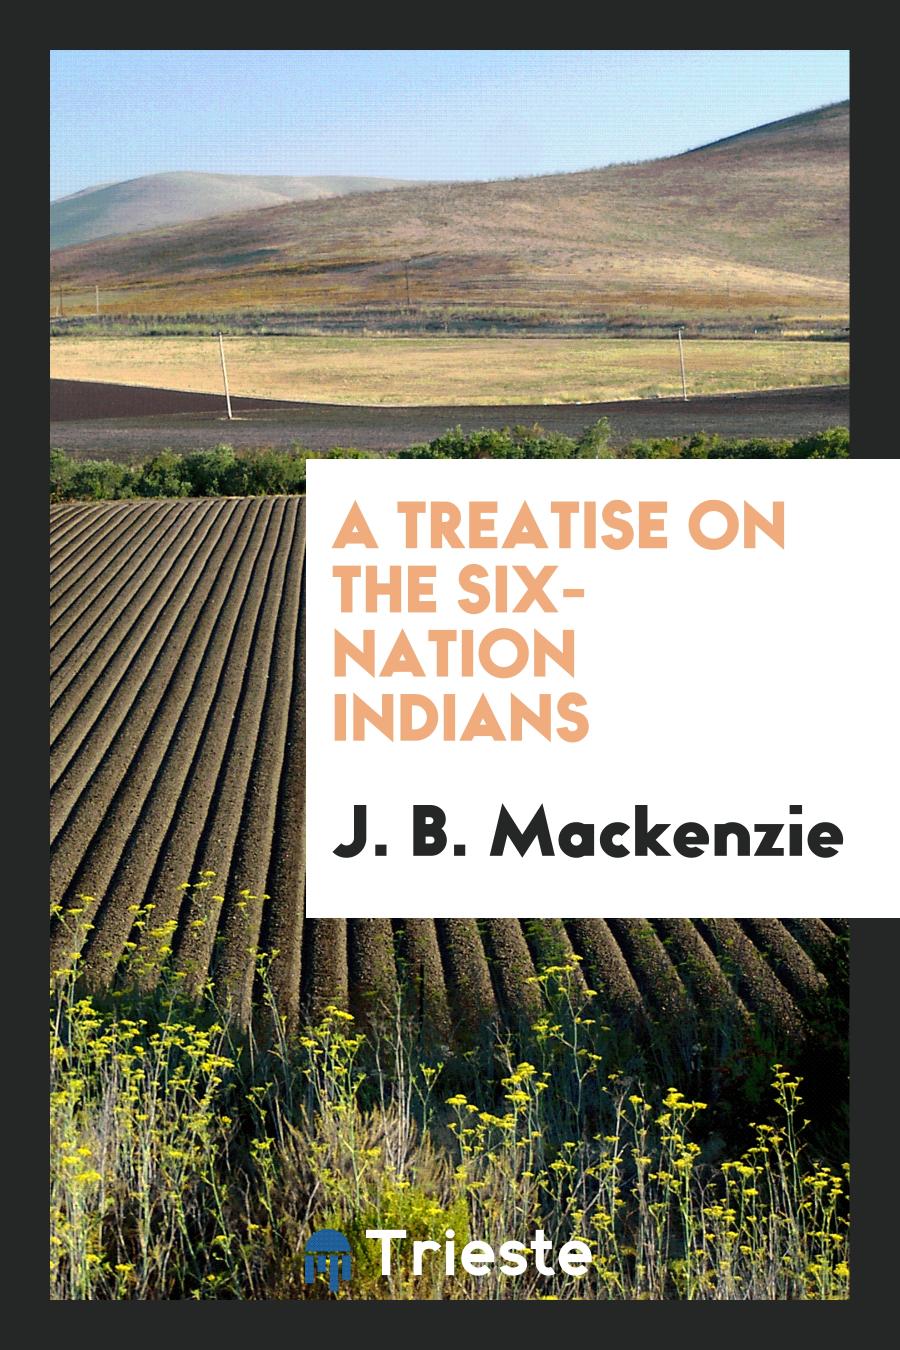 A Treatise on the Six-nation Indians